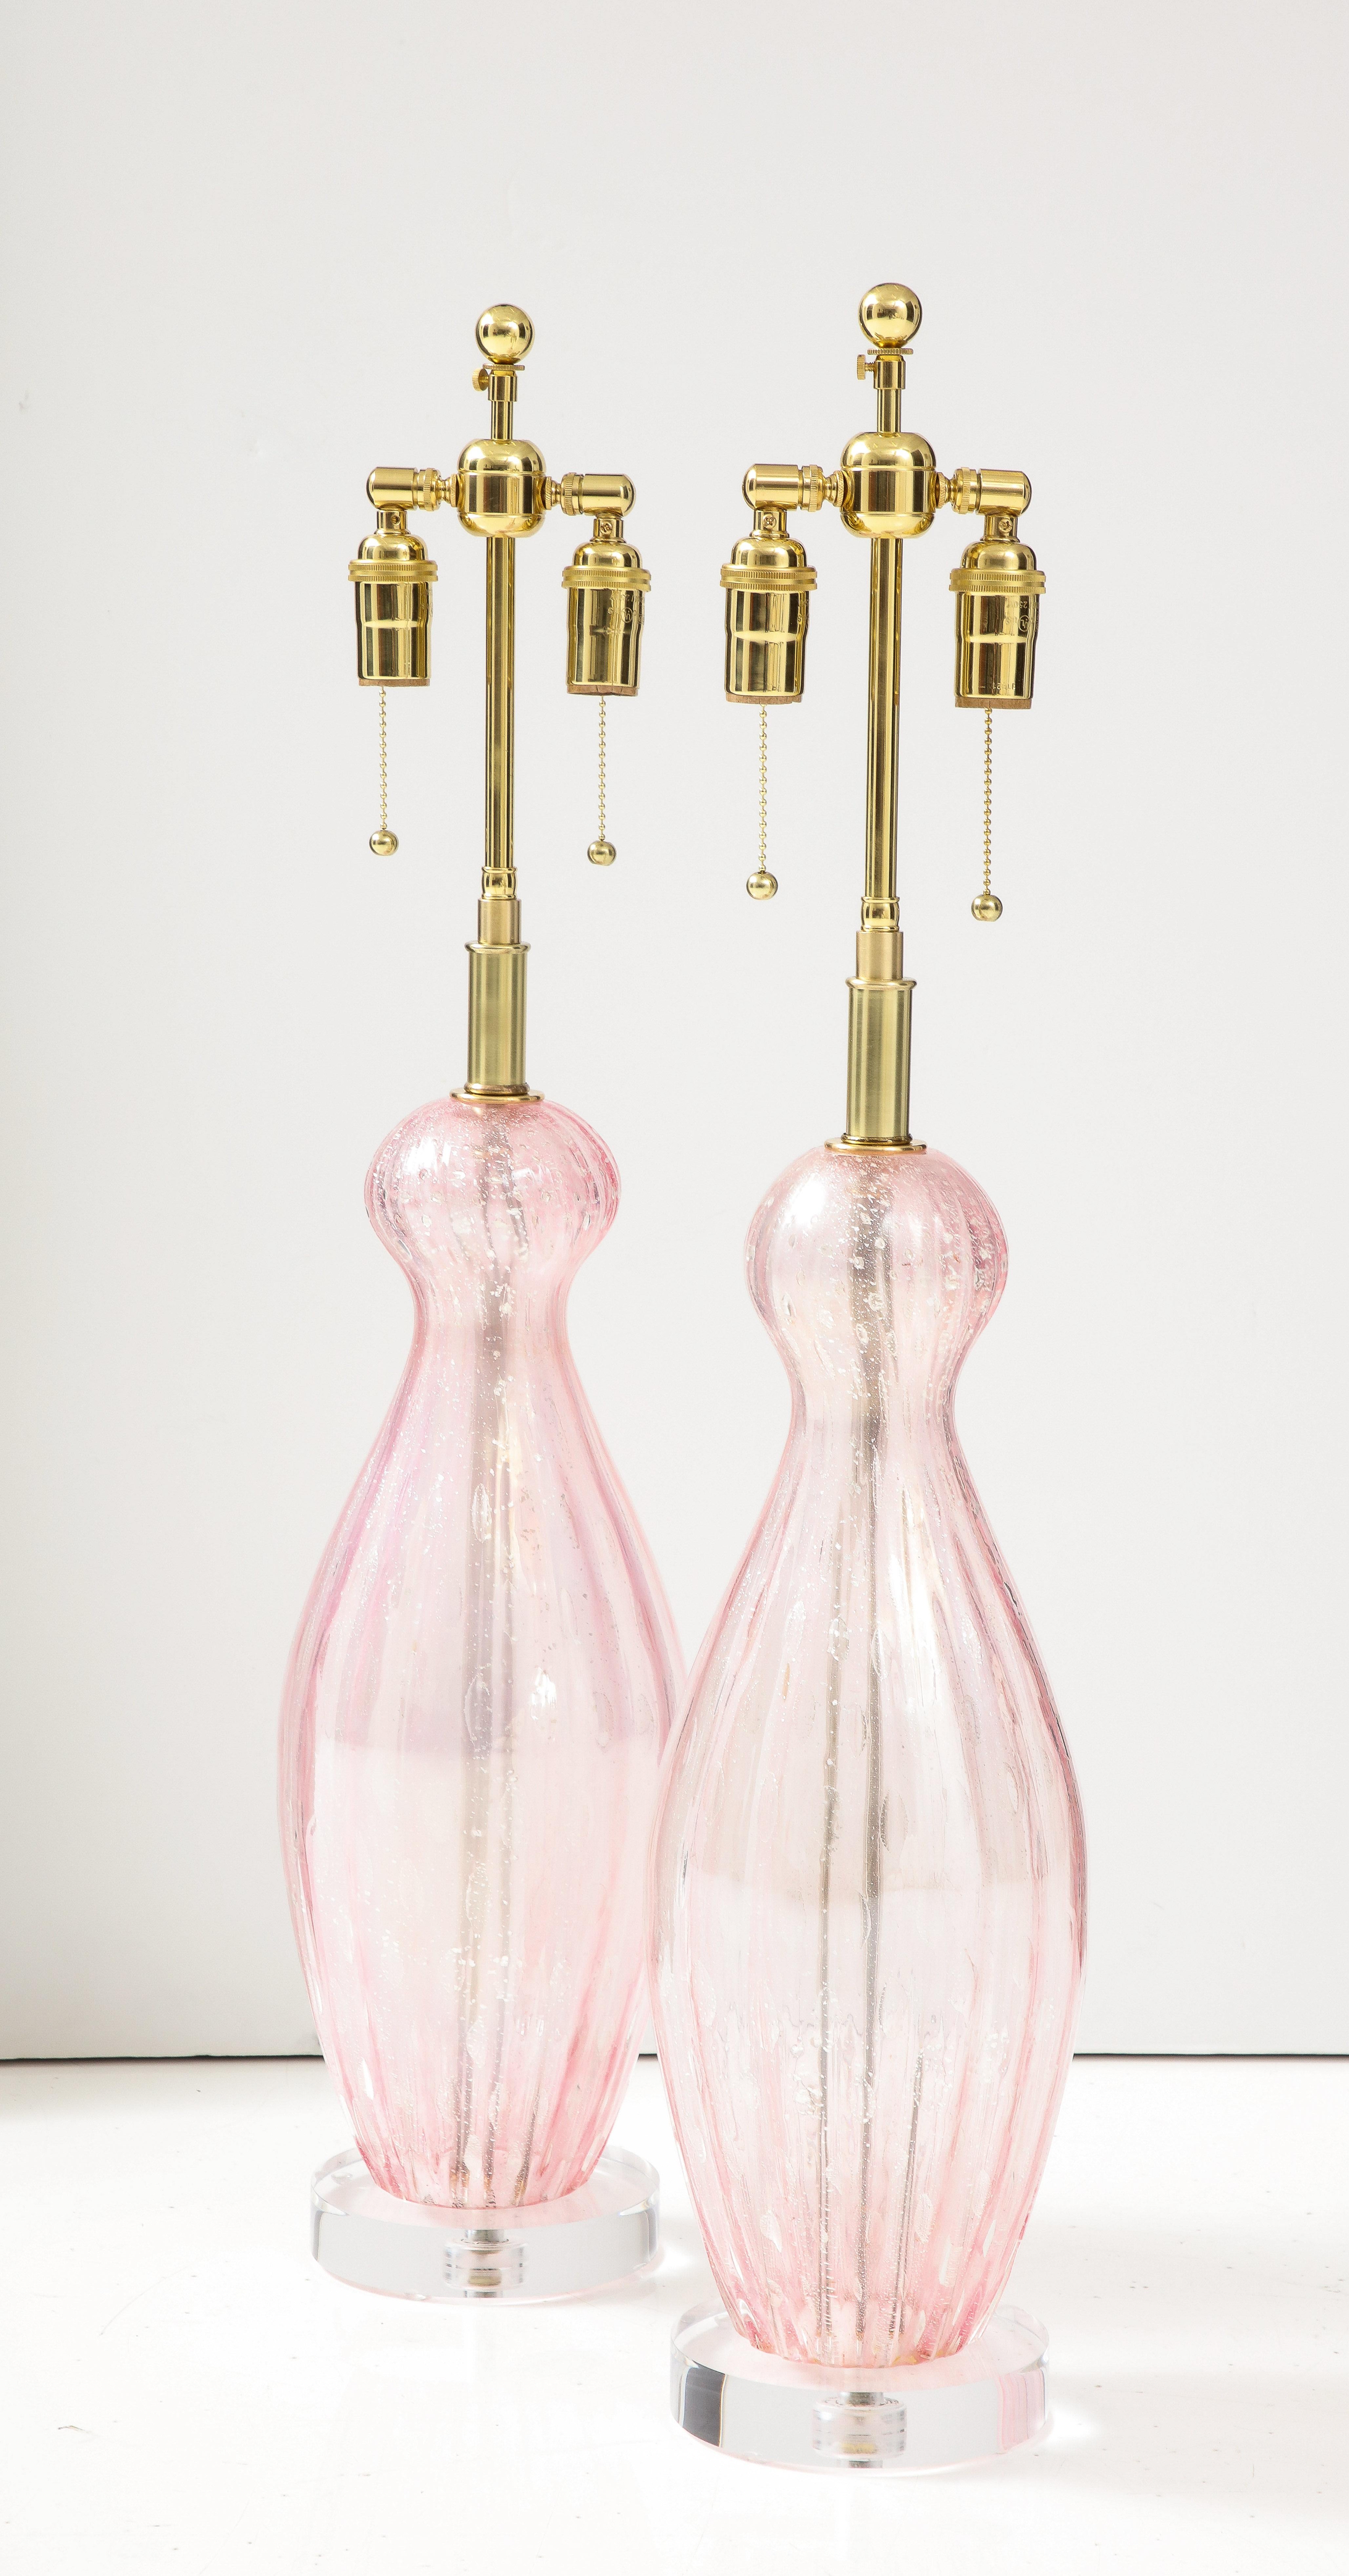 Pair of Large Pink Murano glass lamps with controlled bubbles.
The lamps are mounted on thick lucite bases and have been Newly rewired
with adjustable polished brass double clusters that take standard size light
bulbs.
The height to the top of the